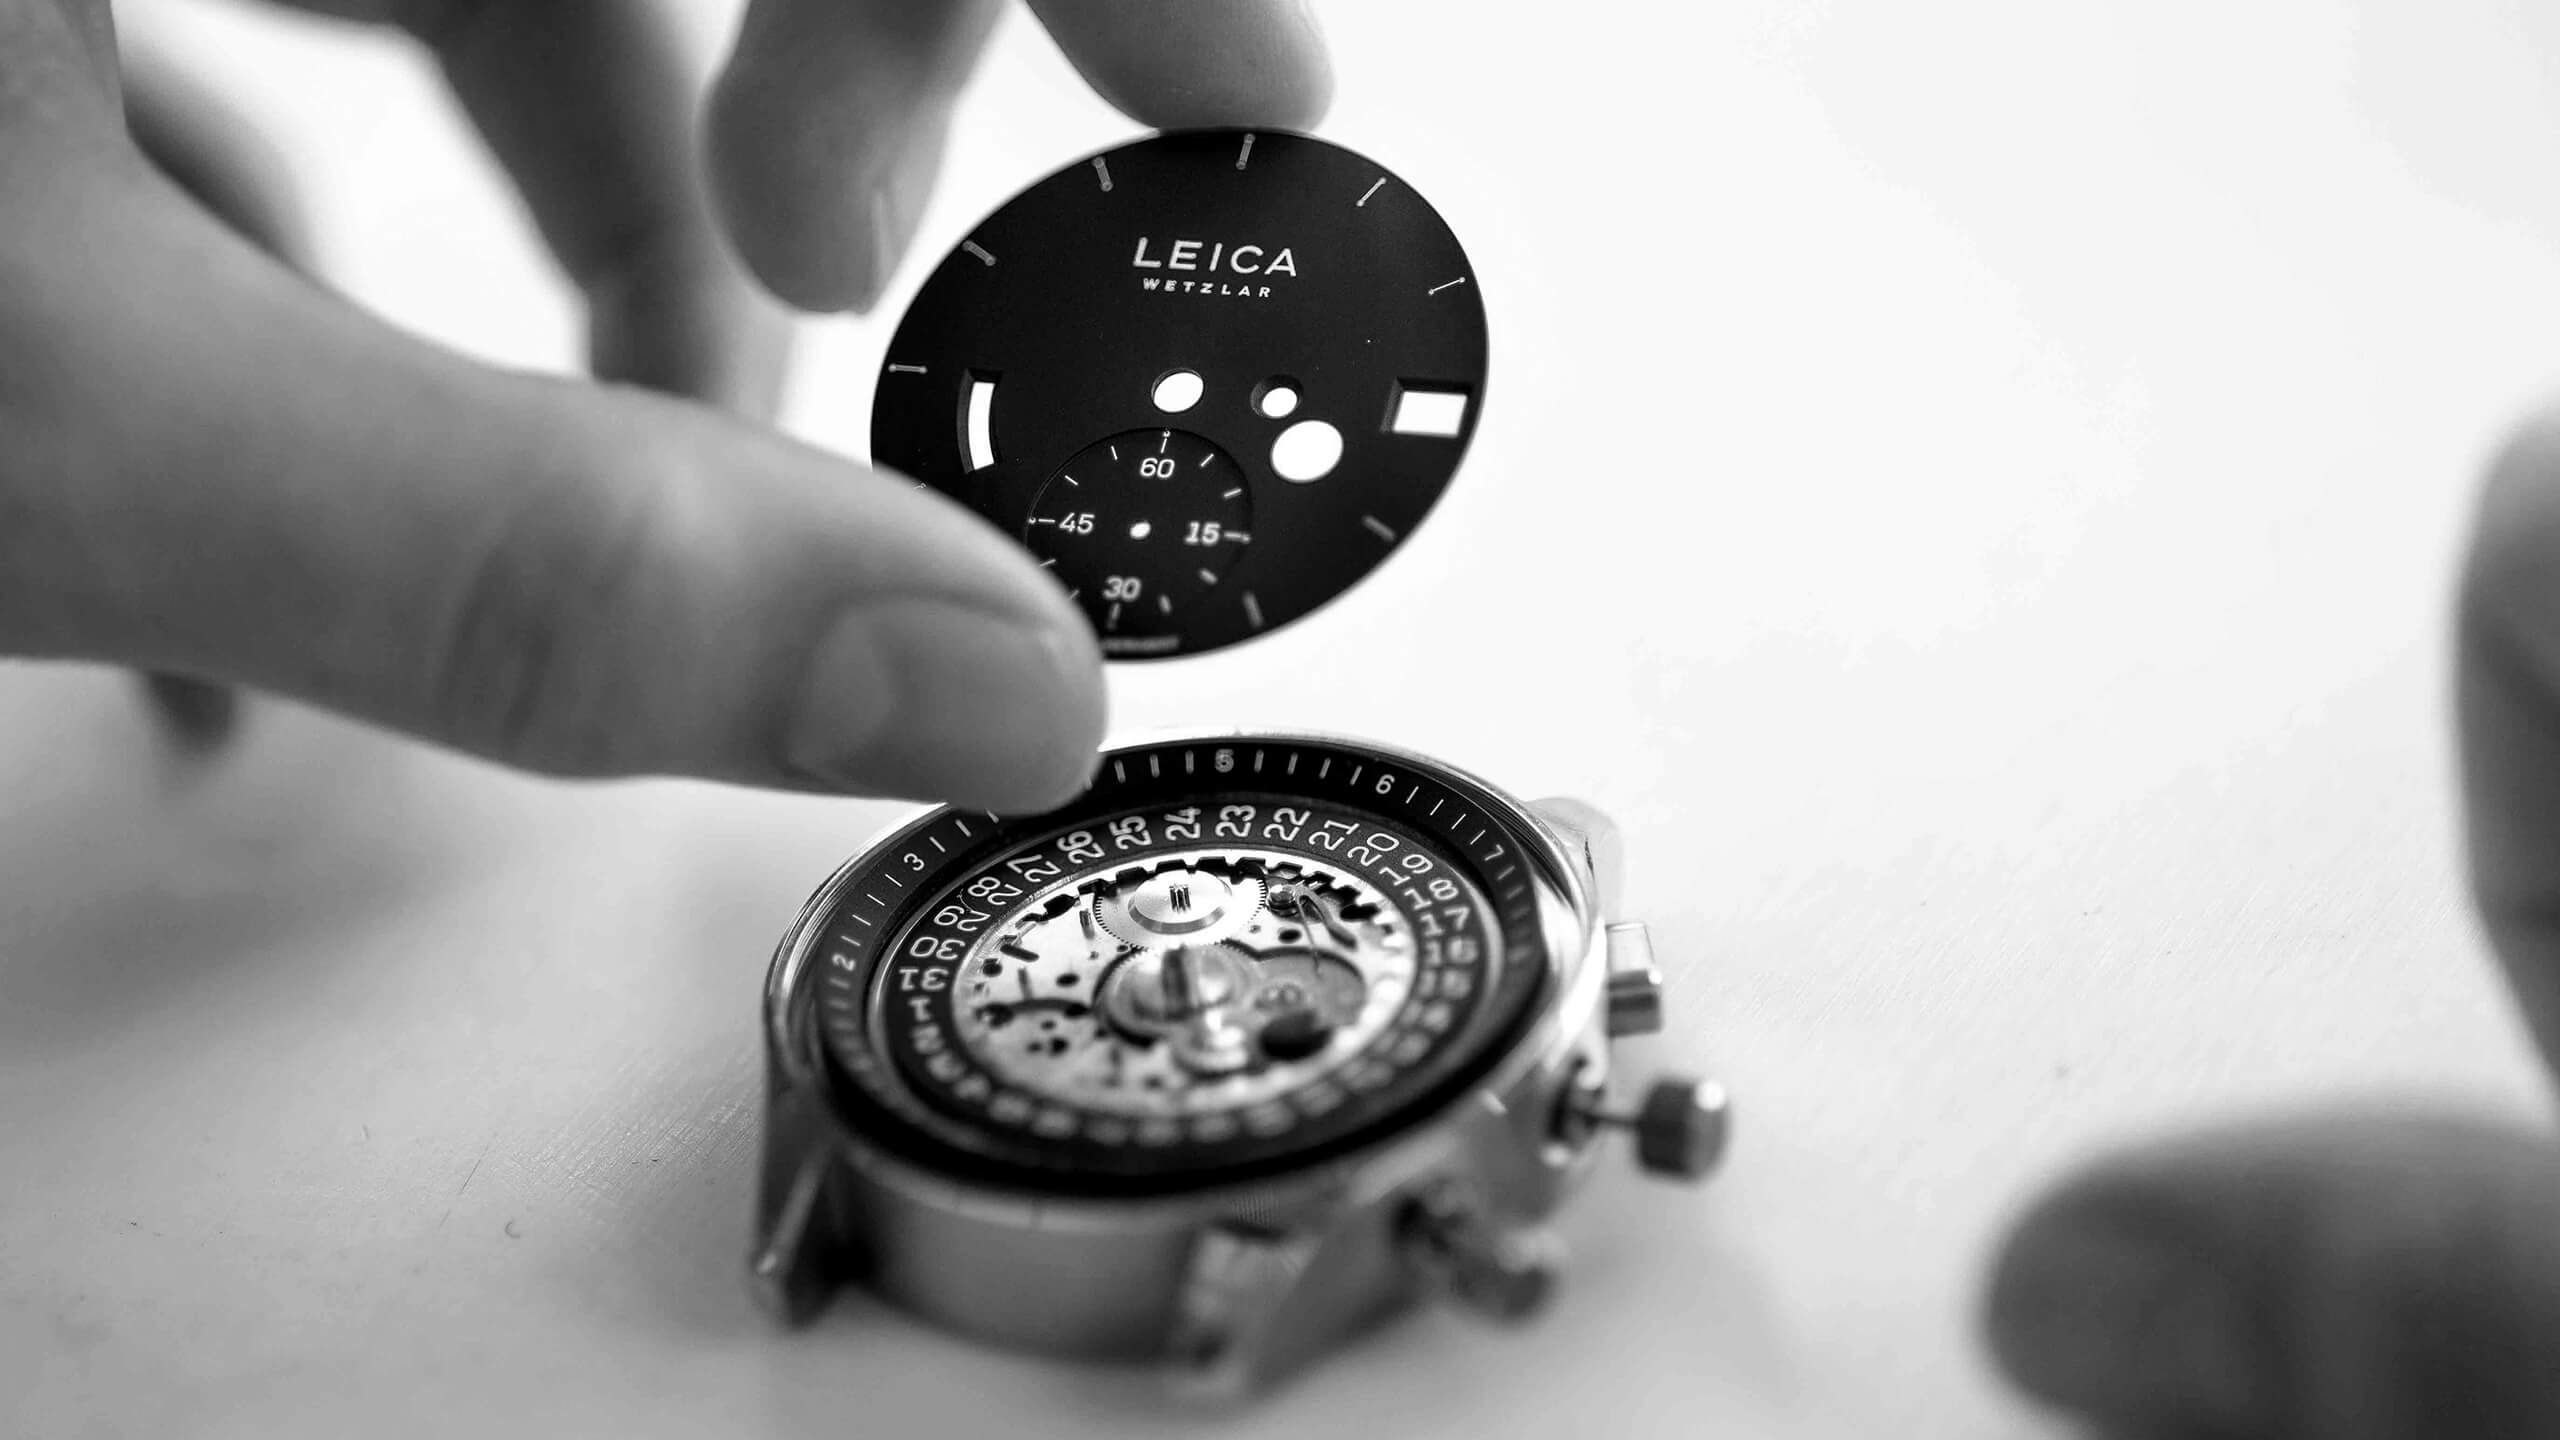 The making of Leica L2 watch